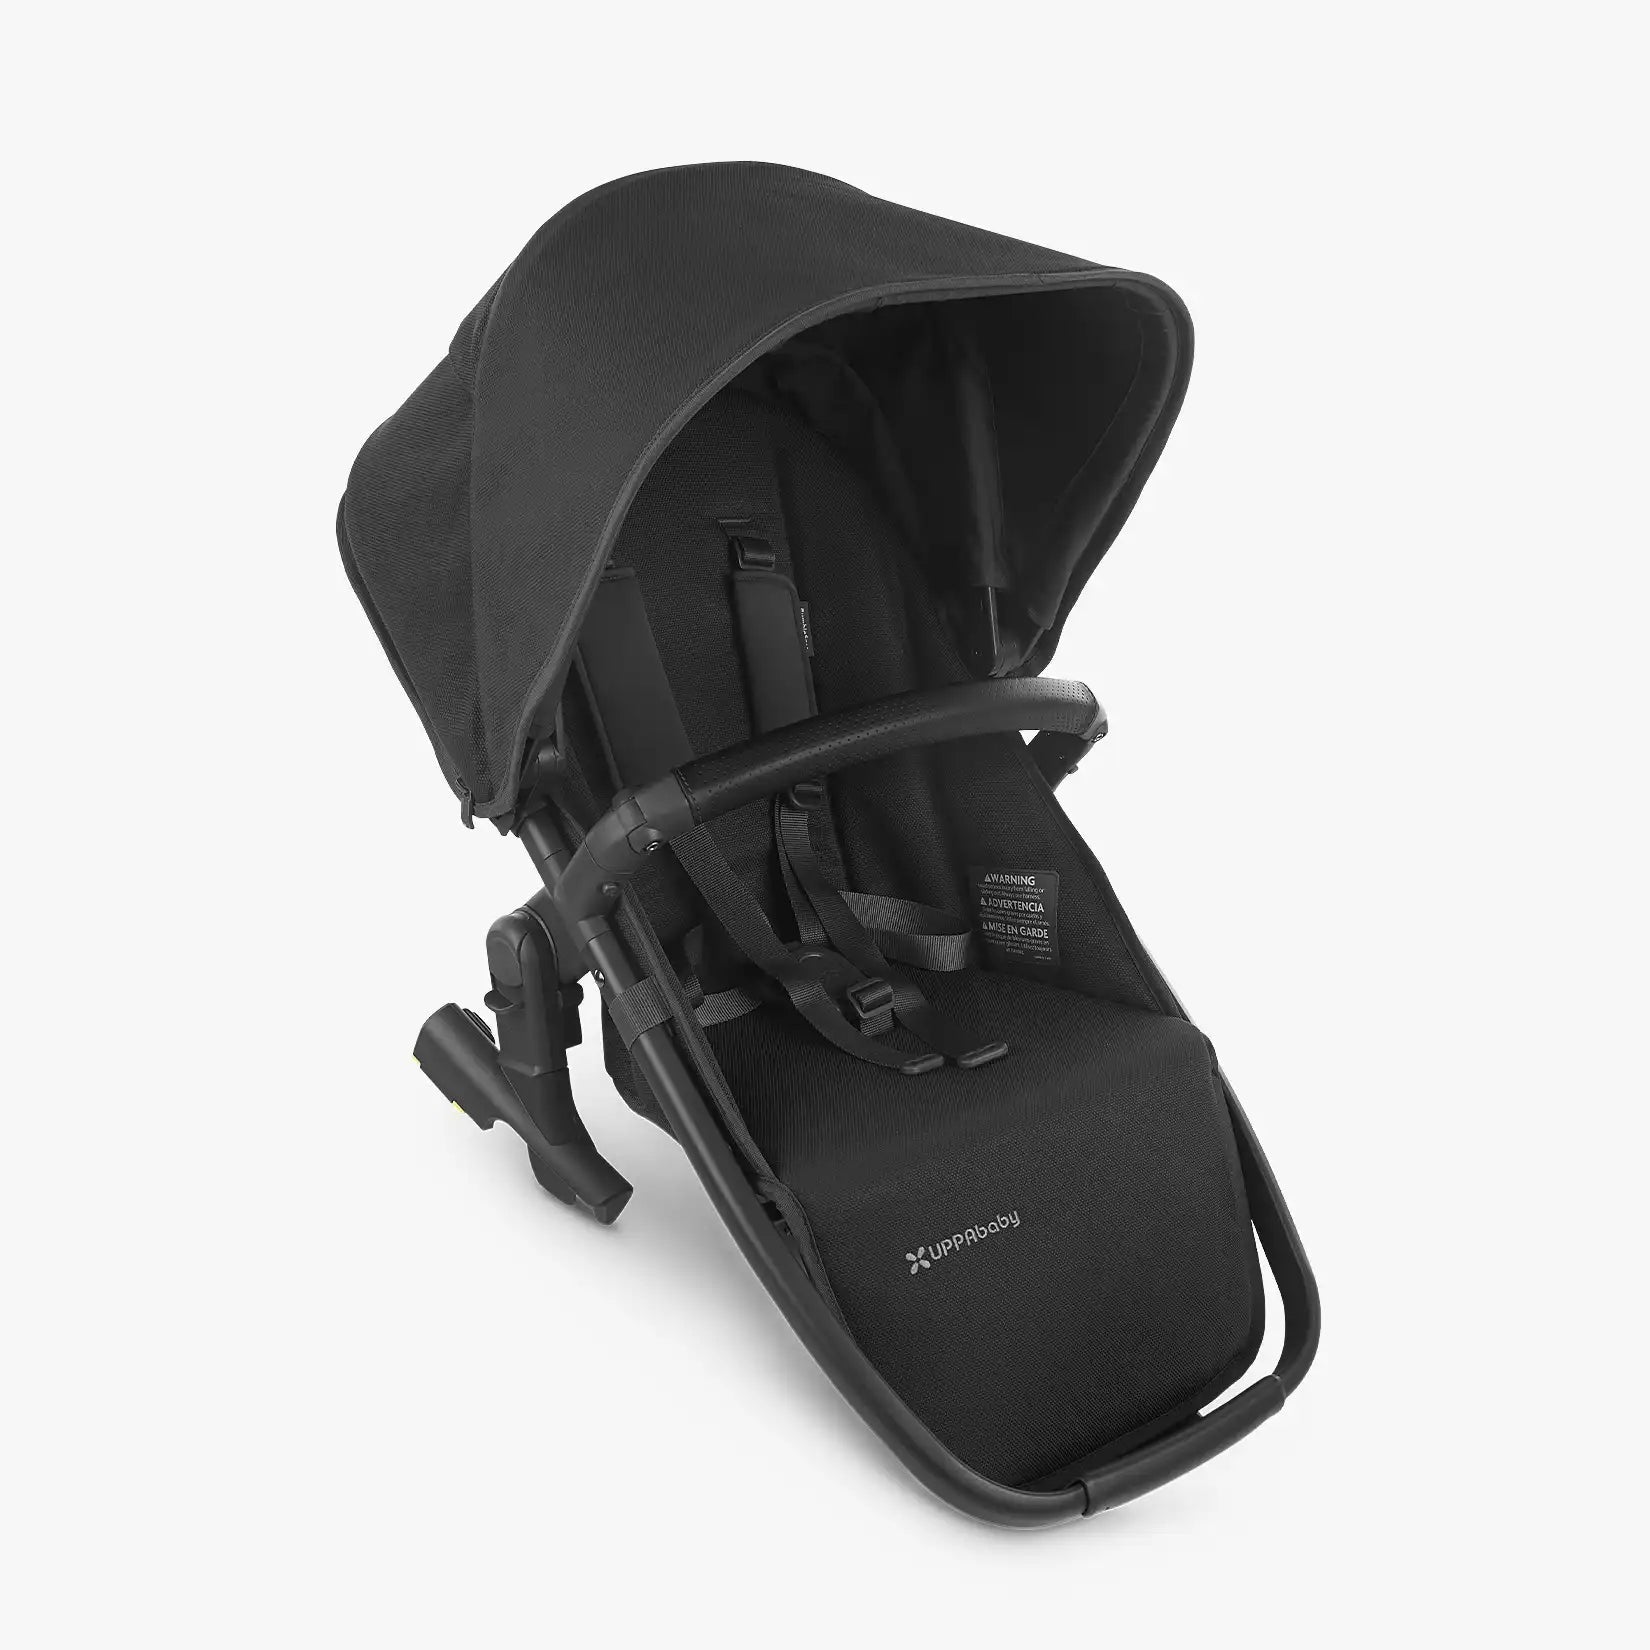 UPPAbaby RumbleSeat V2 - ANB Baby -810030091332$100 - $300